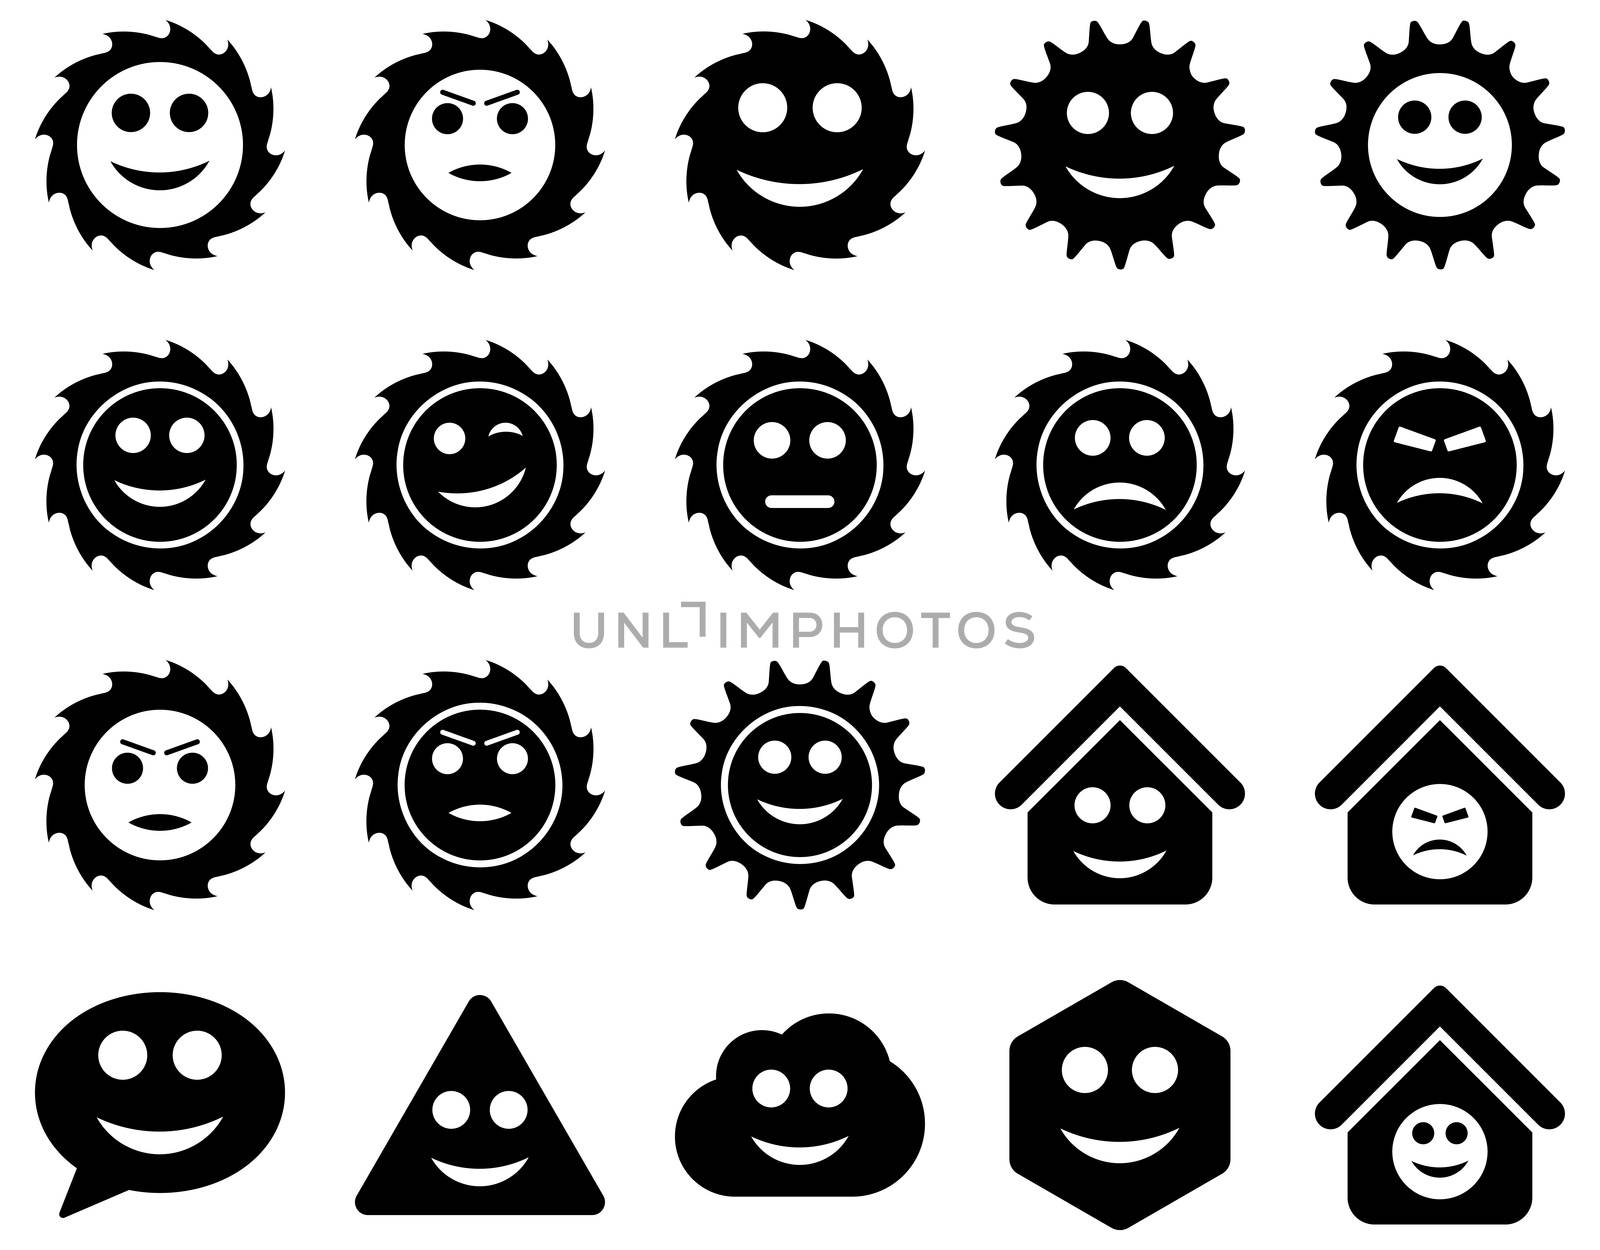 Tools, gears, smiles, emotions icons. Glyph set style is flat images, black symbols, isolated on a white background.